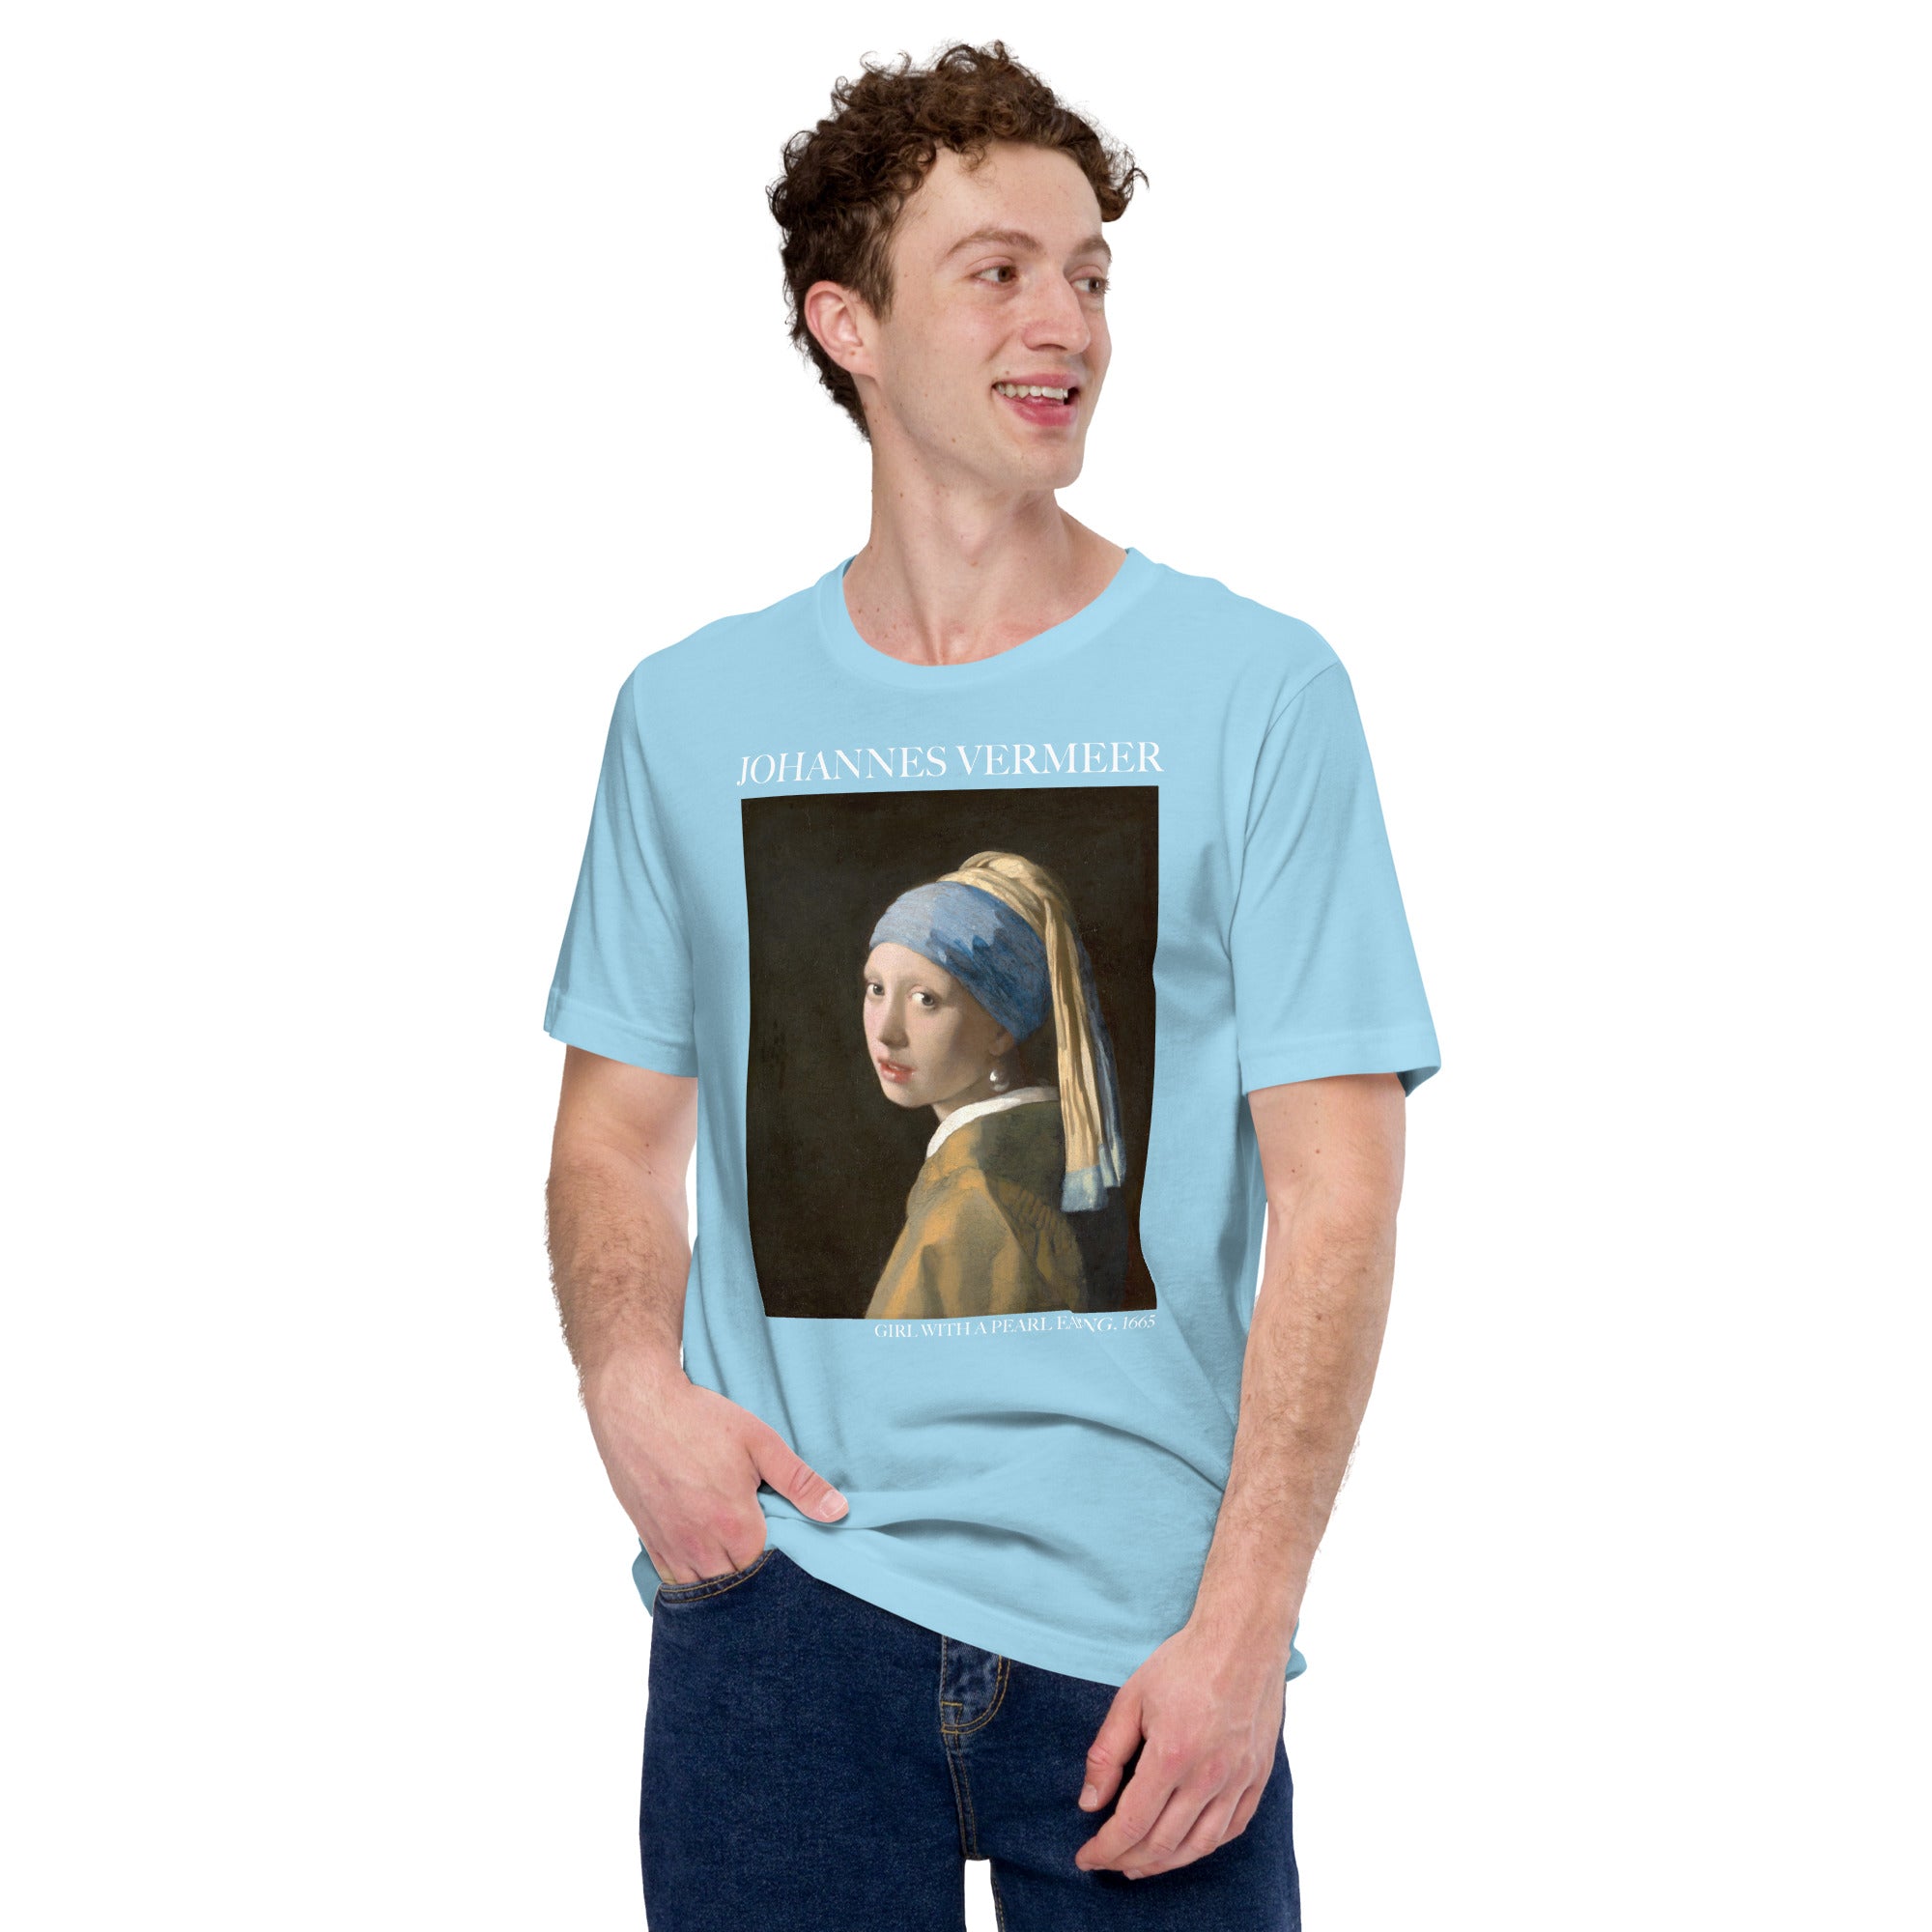 Johannes Vermeer 'Girl with a Pearl Earring' Famous Painting T-Shirt | Unisex Classic Art Tee